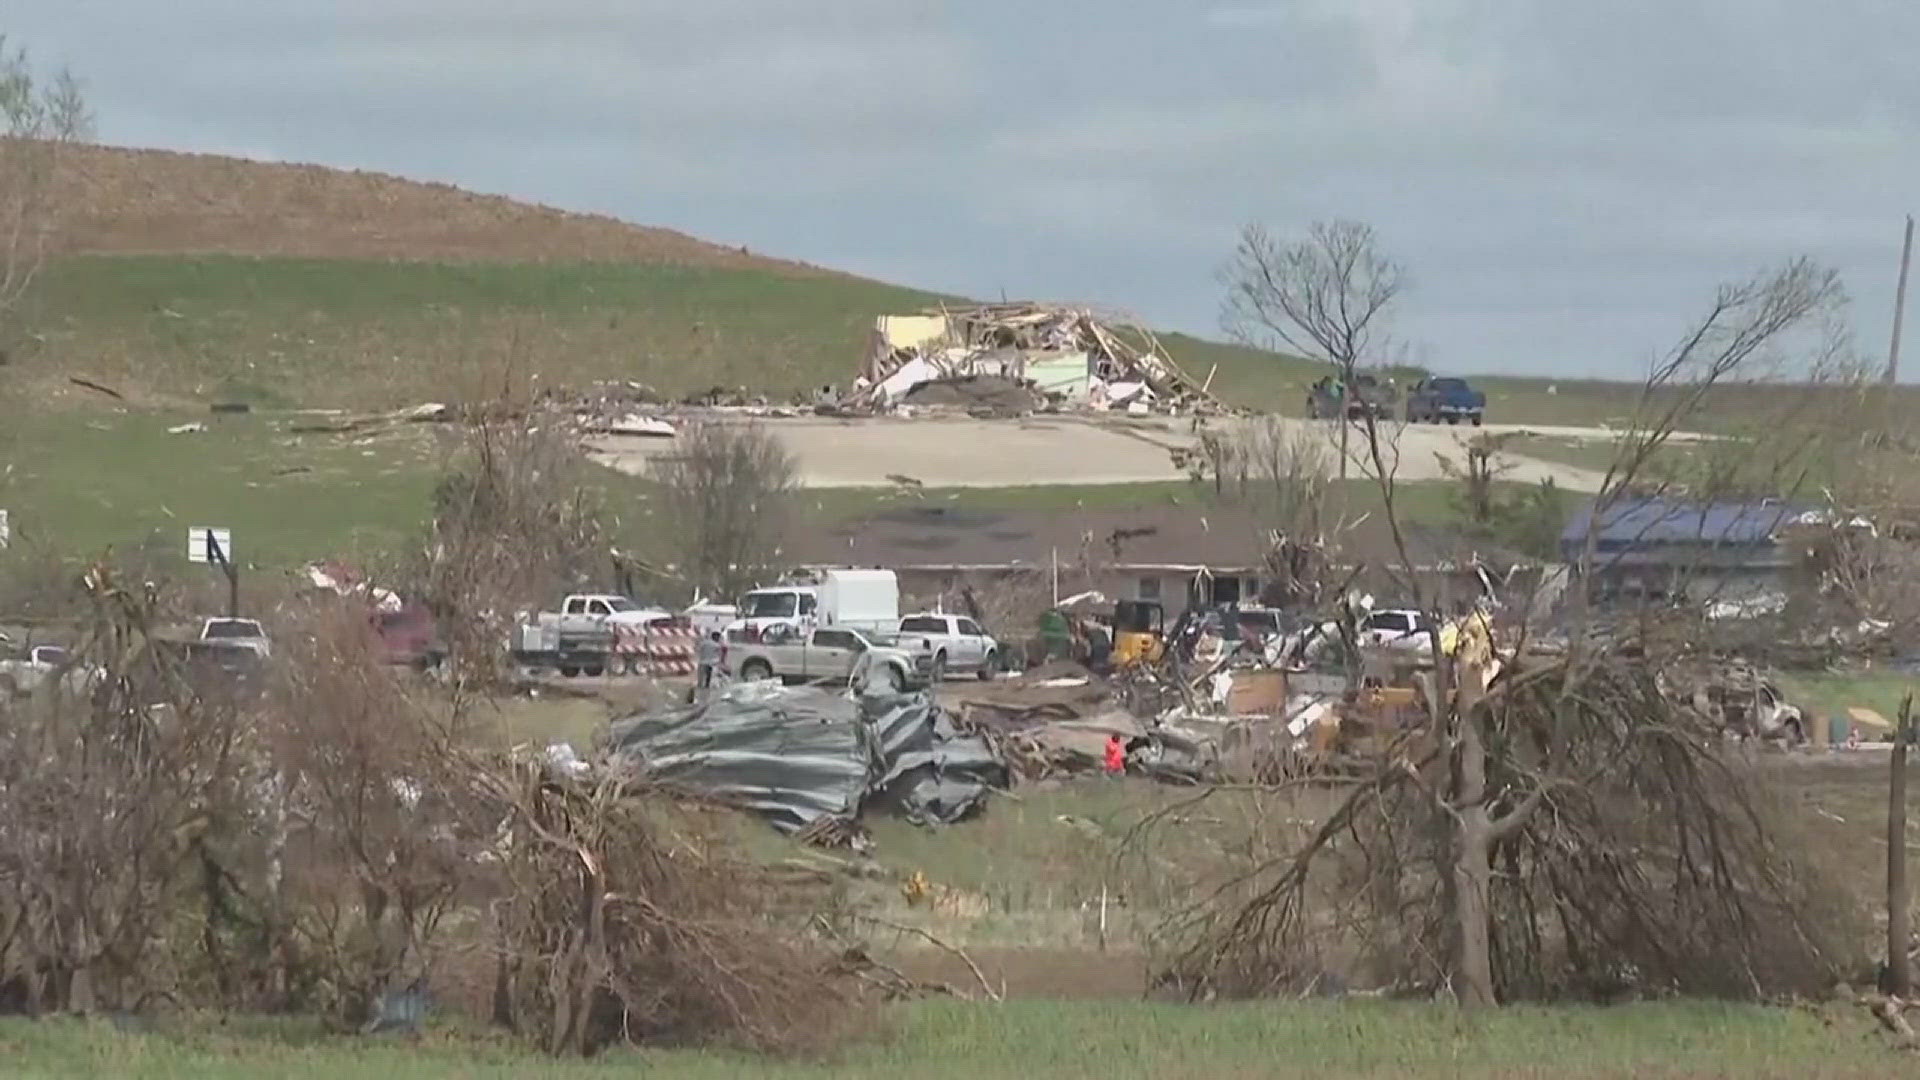 Minden, Iowa residents are recovering after a tornado touched down over the weekend. One person was killed, and another three were injured during the storm.